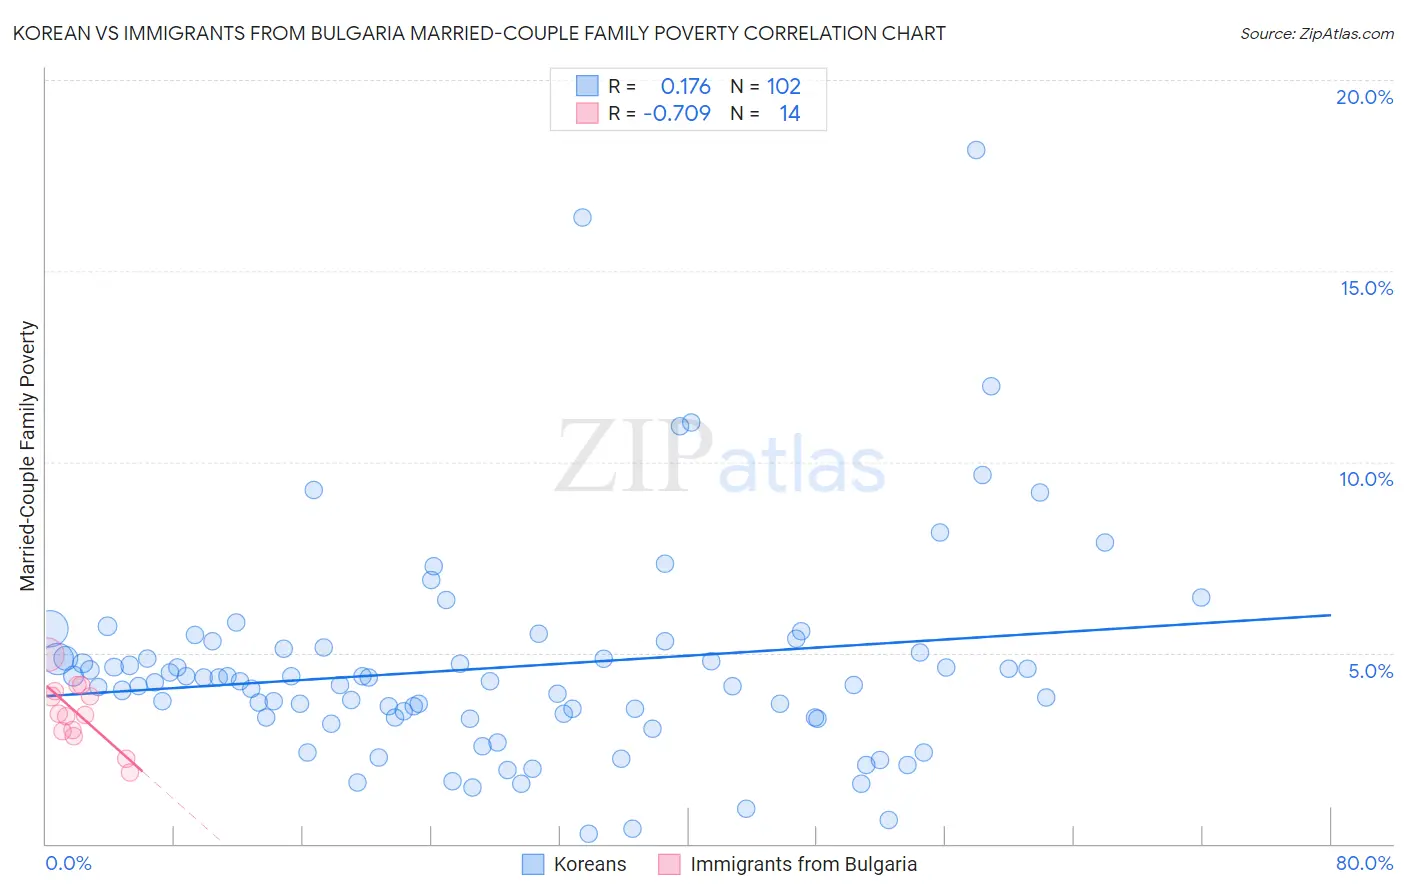 Korean vs Immigrants from Bulgaria Married-Couple Family Poverty